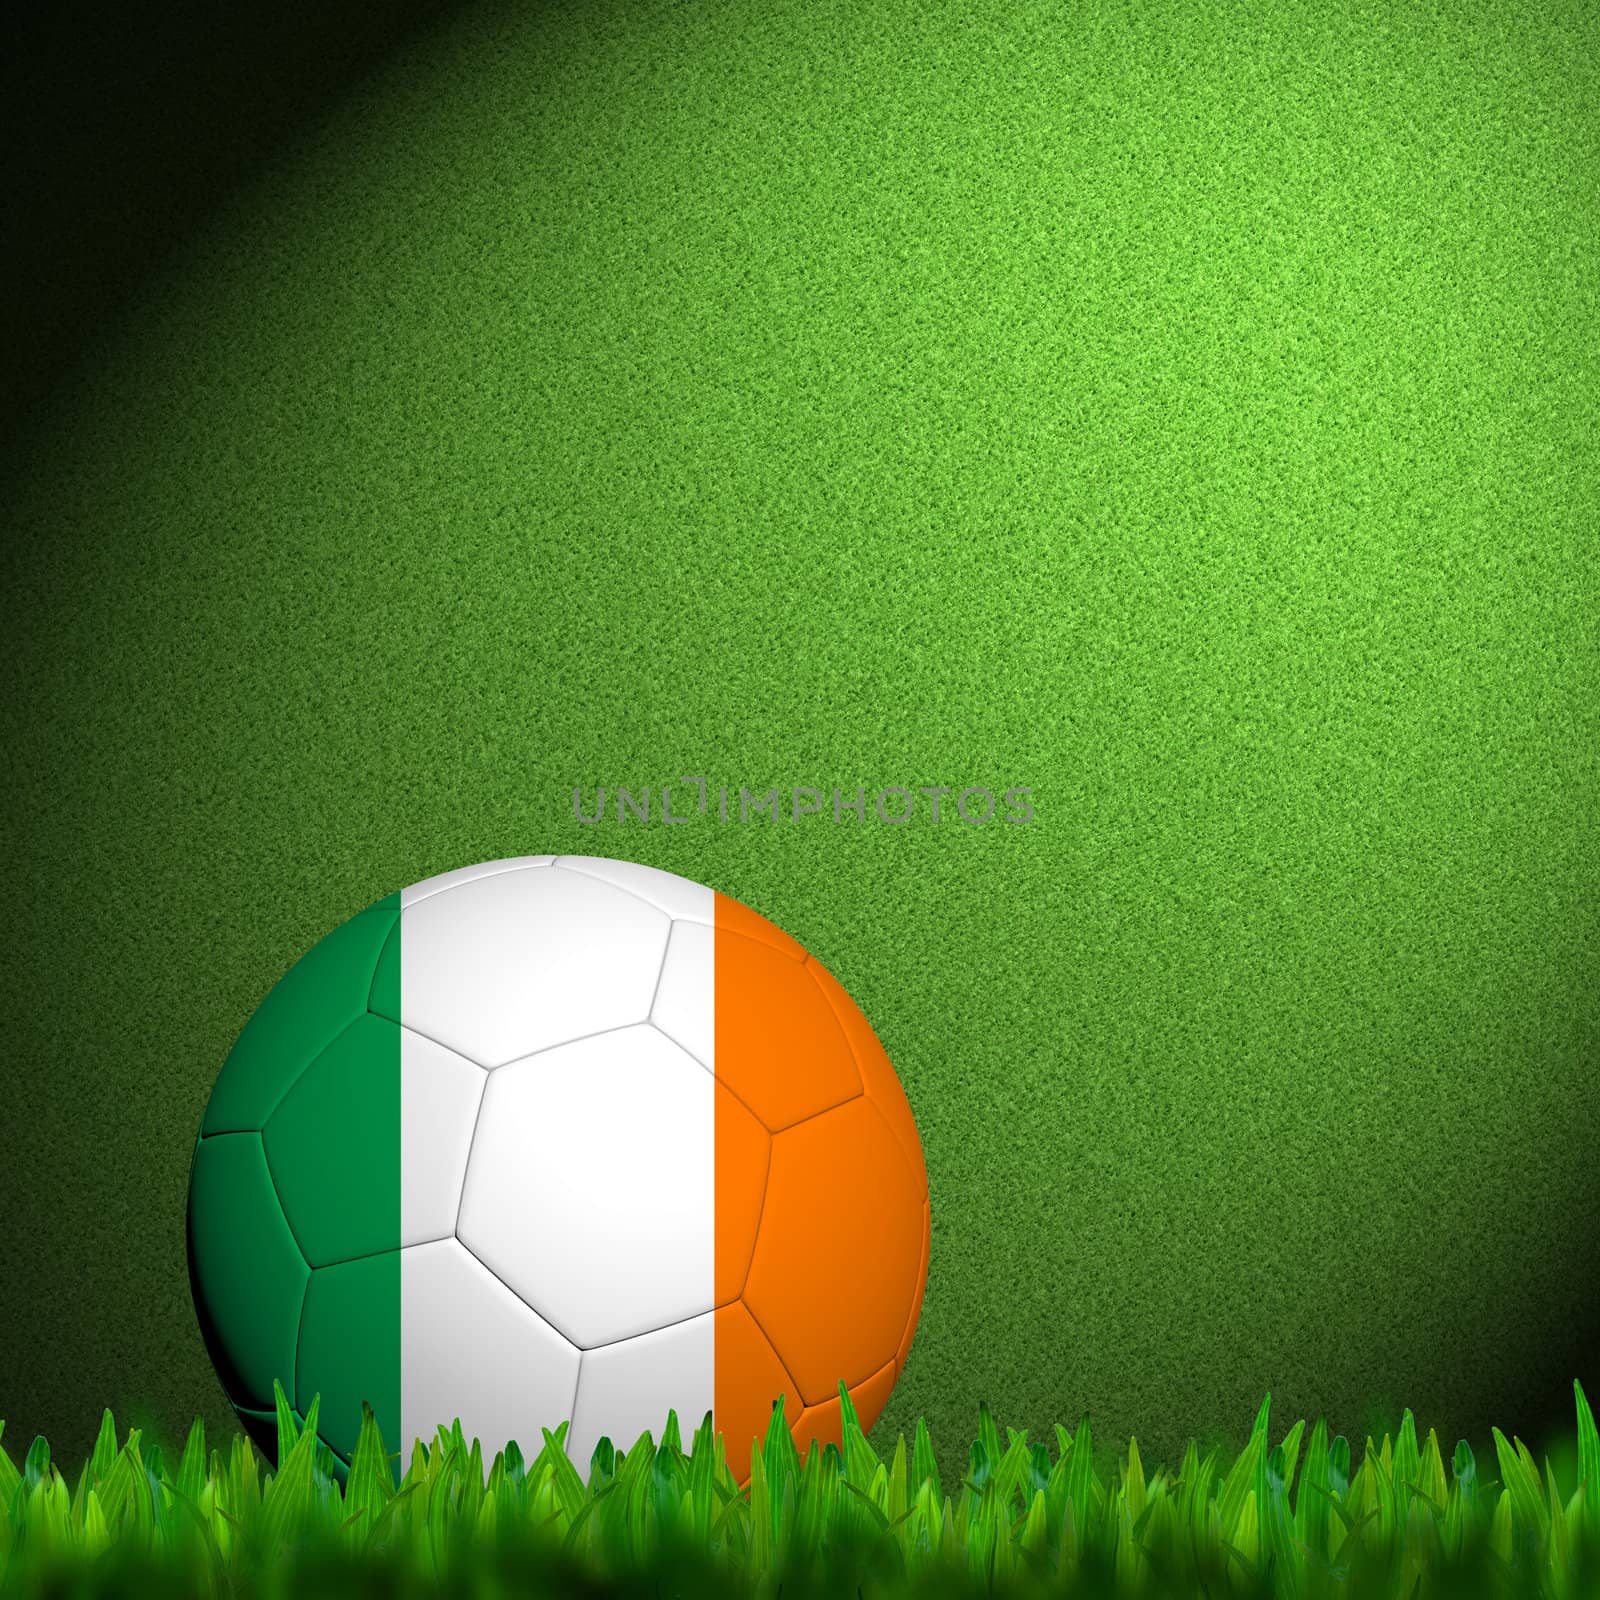 3D Football Ireland Flag Patter in green grass by jakgree